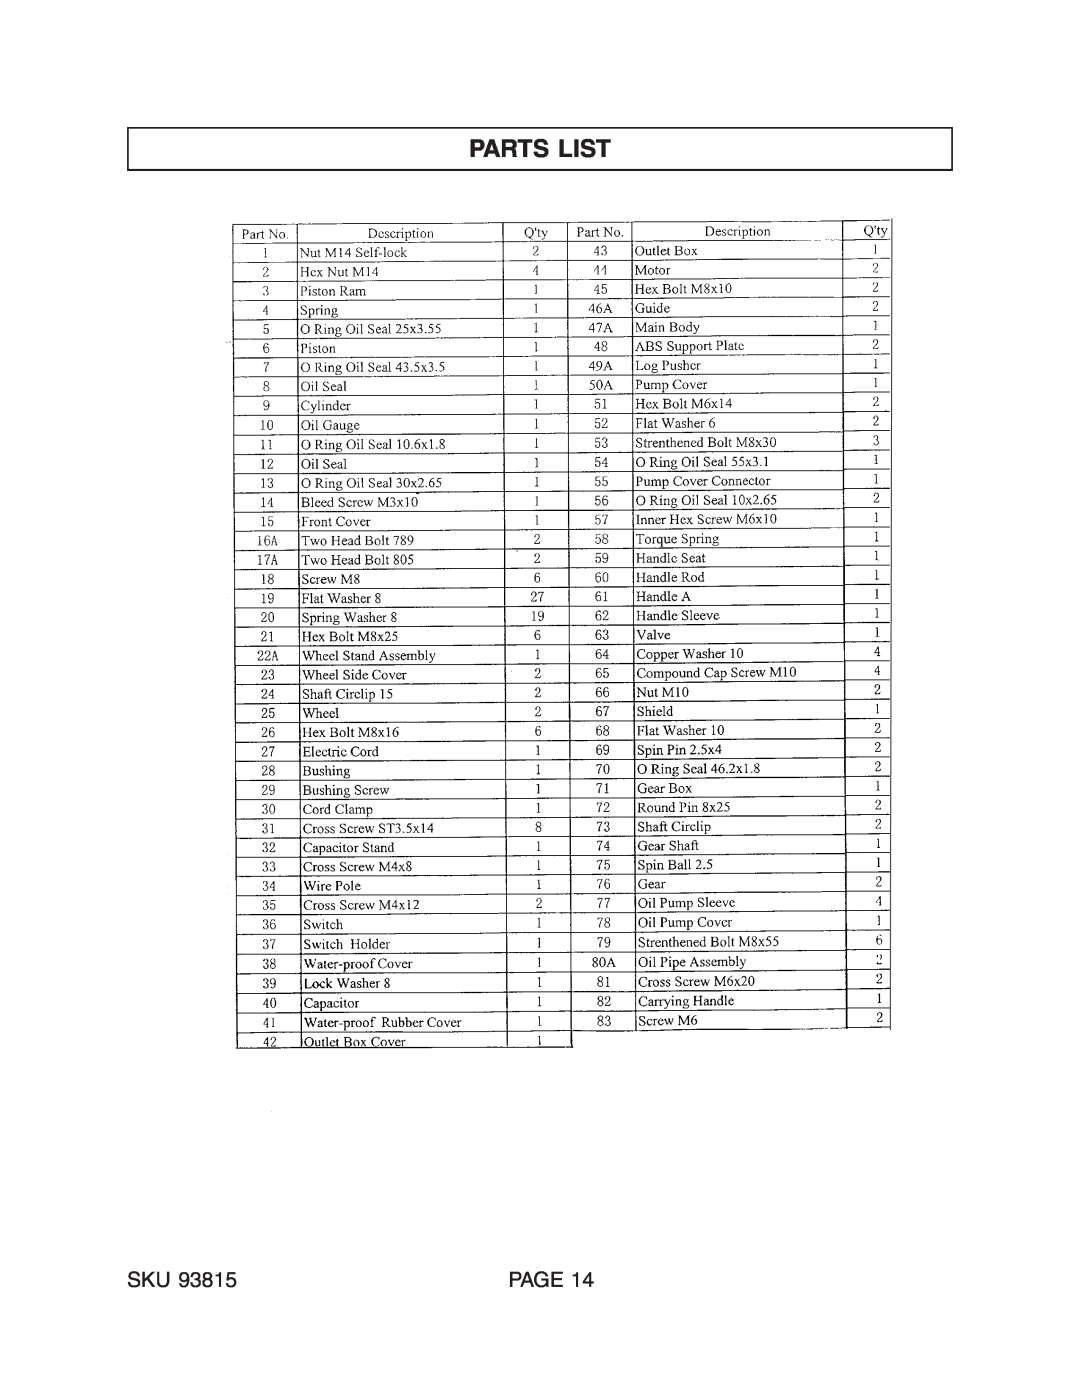 Harbor Freight Tools 93815 manual Parts List, Page 